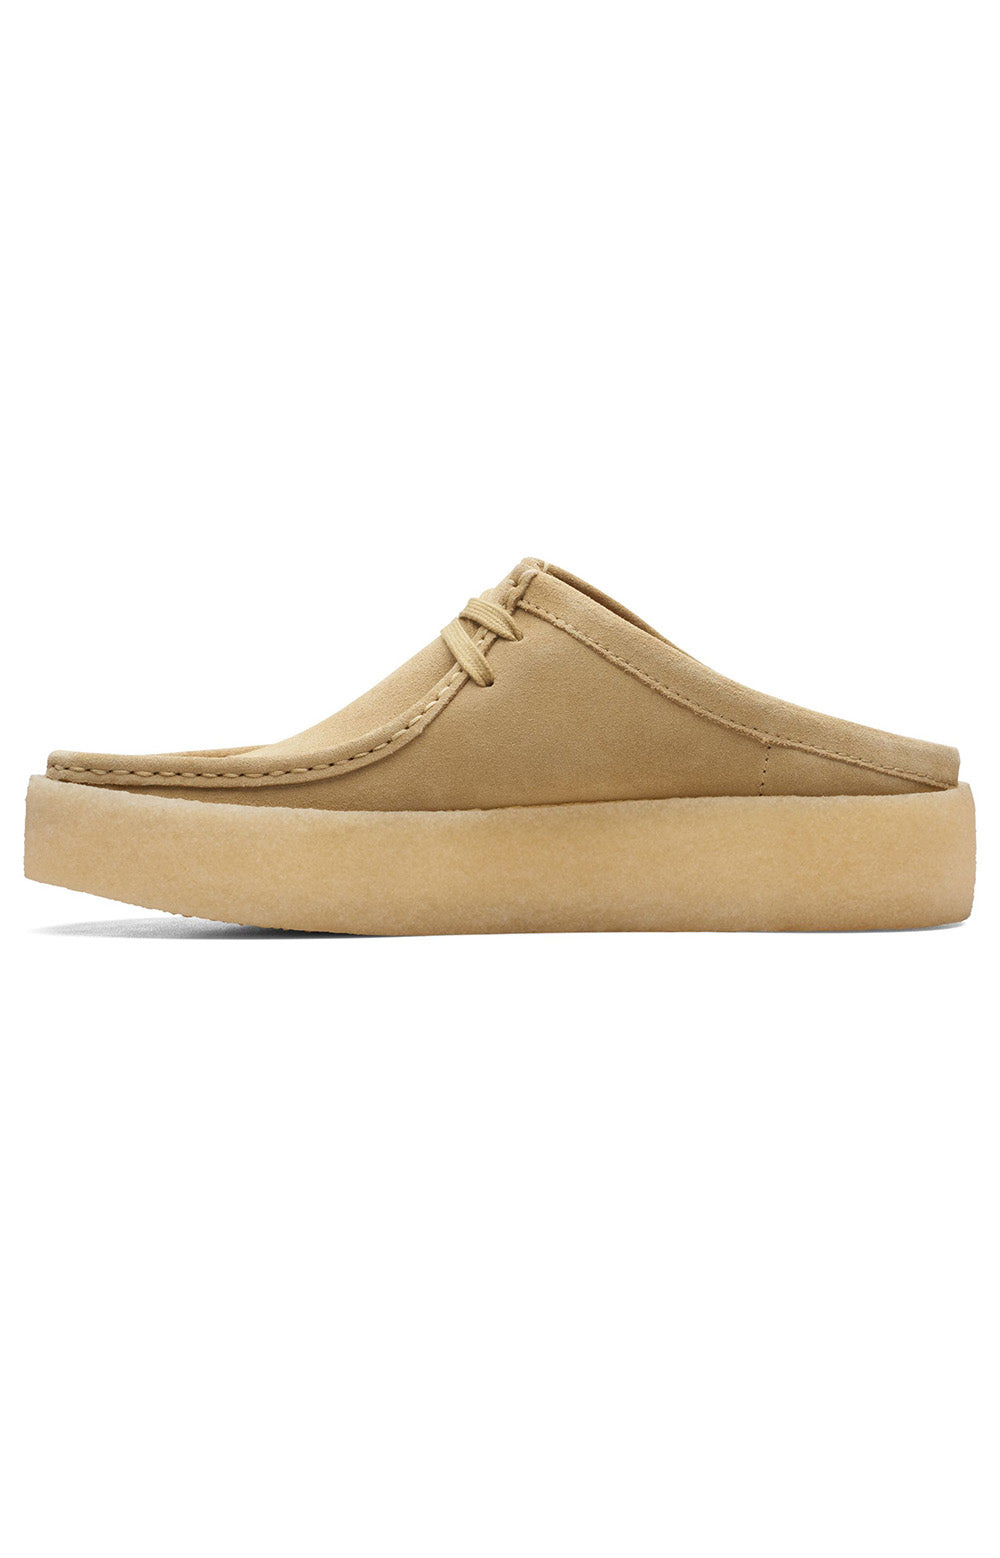 Clarks Originals Wallabee Cup Low Men's Maple Suede 26167286 shoe paired with denim jeans